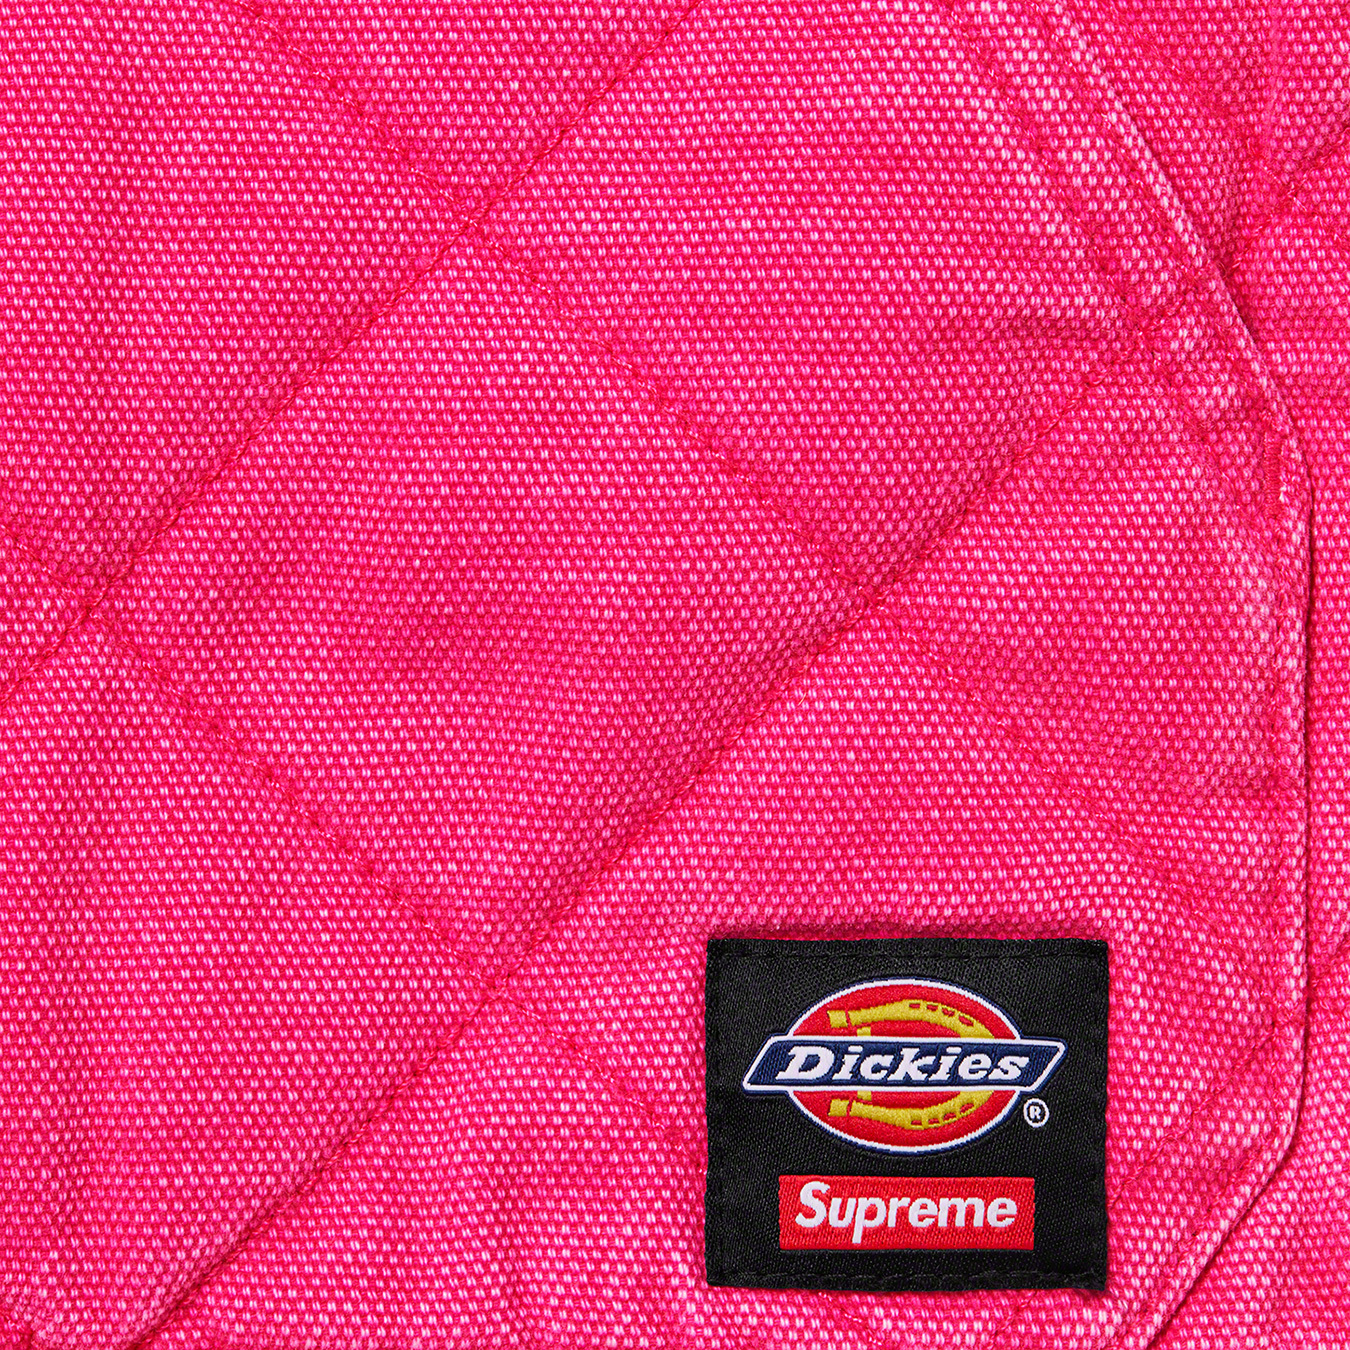 Supreme Dickies Quilted Denim Coverall